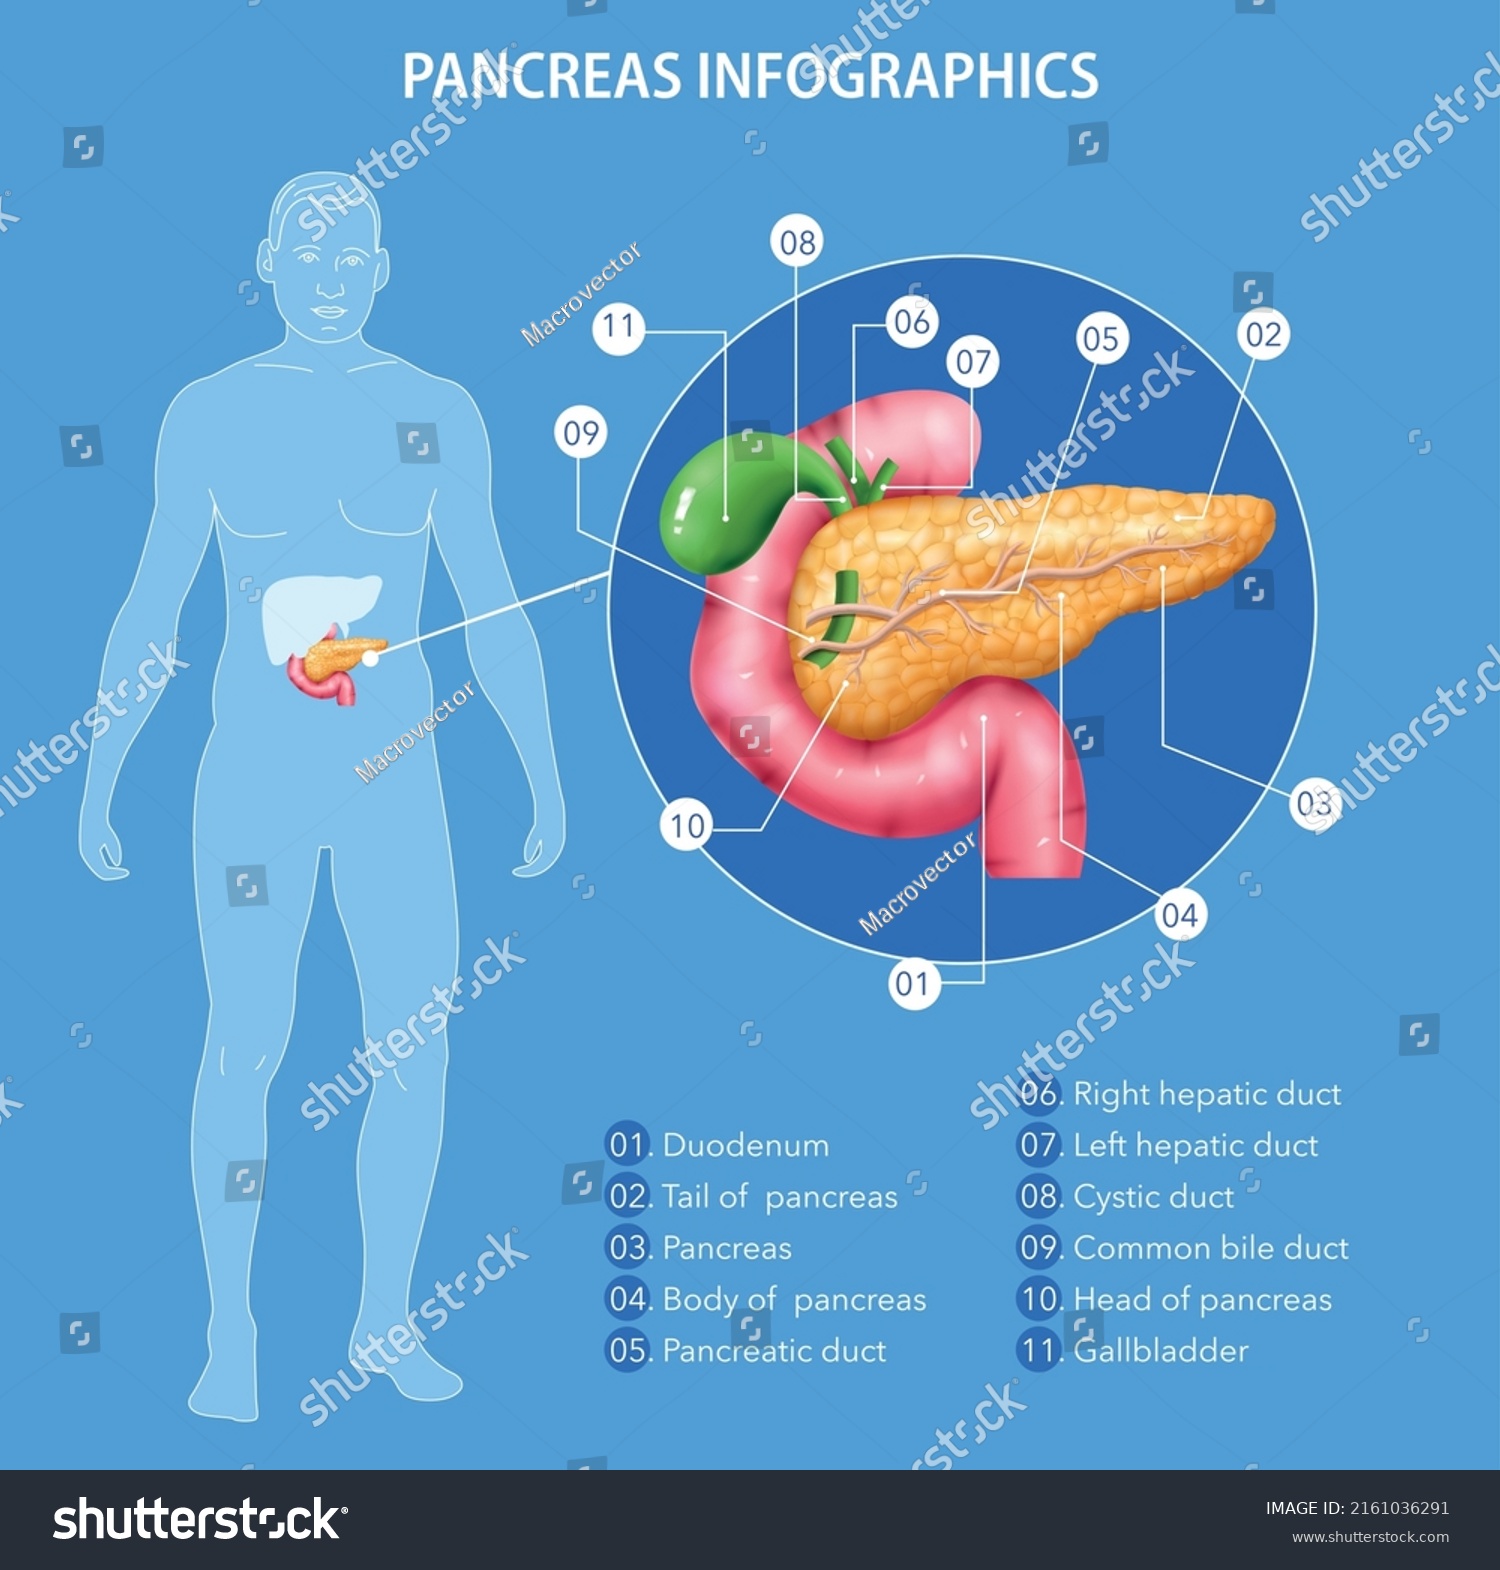 Realistic Pancreas Anatomy Infographics With Human Body Silhouette And Sexiz Pix 6587